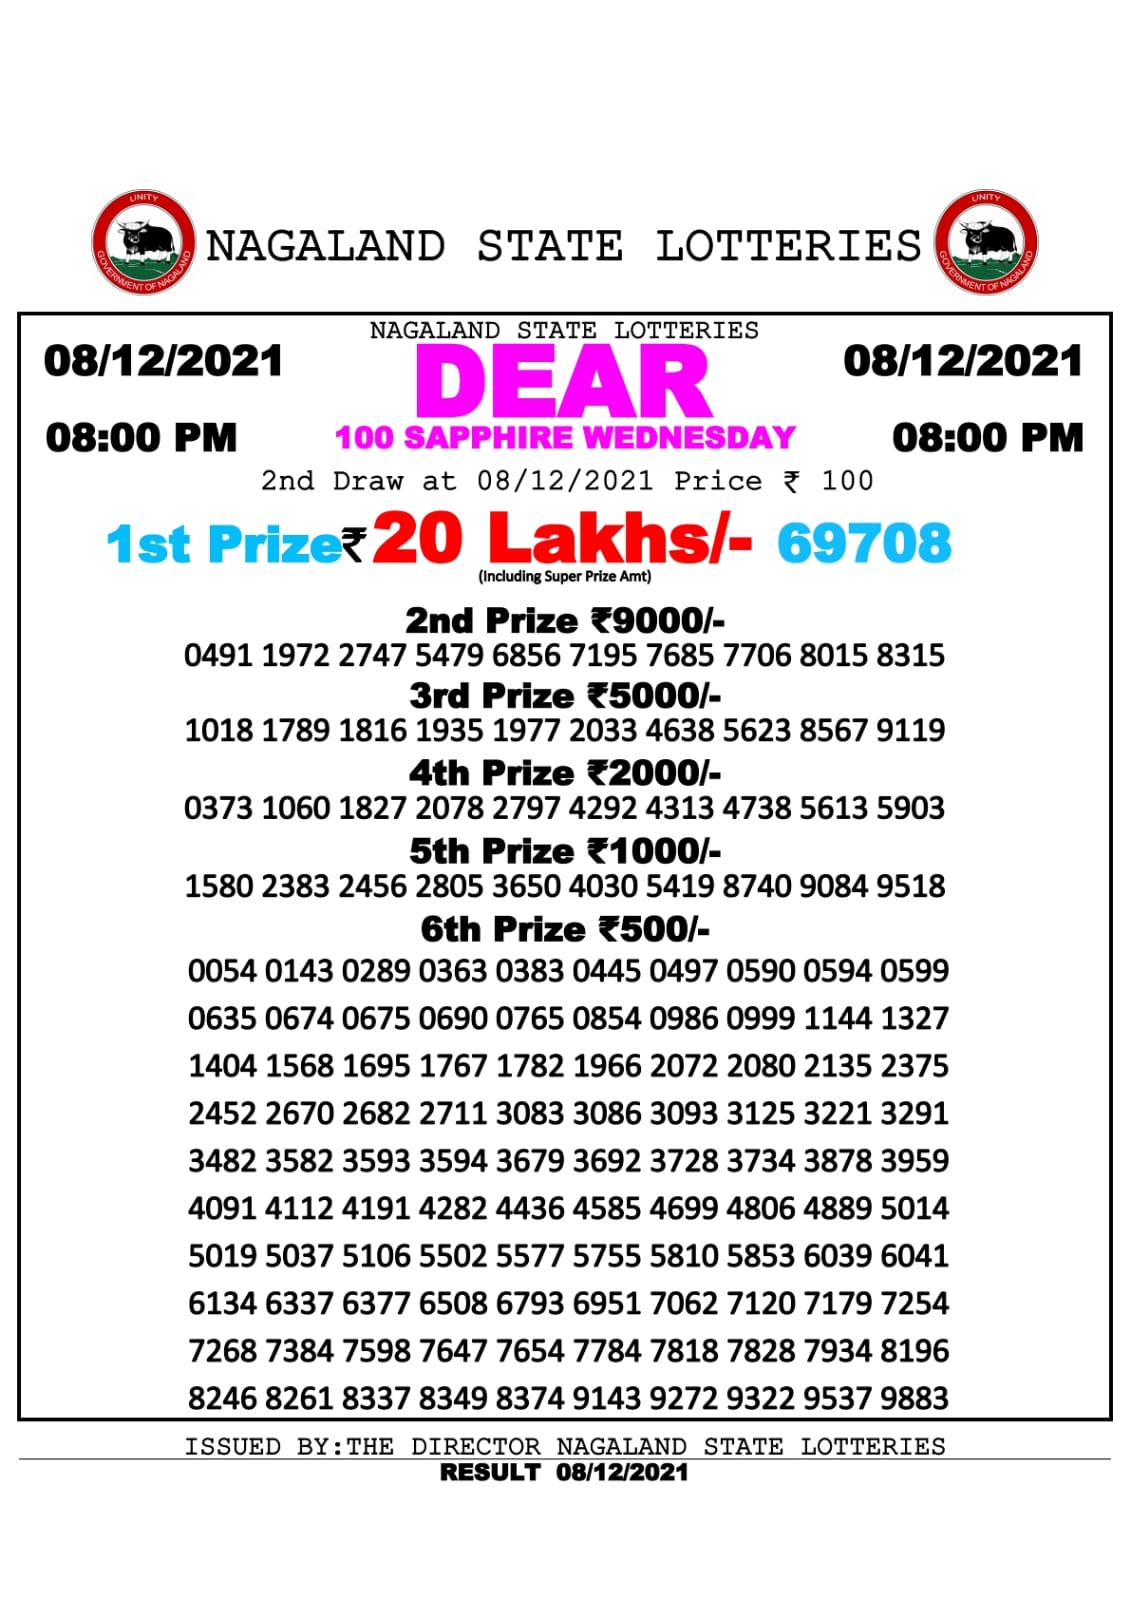 NAGALLAND STATE DEAR 100 SUPER WEEKLY LOTTERY 8 pm 08.12.2021